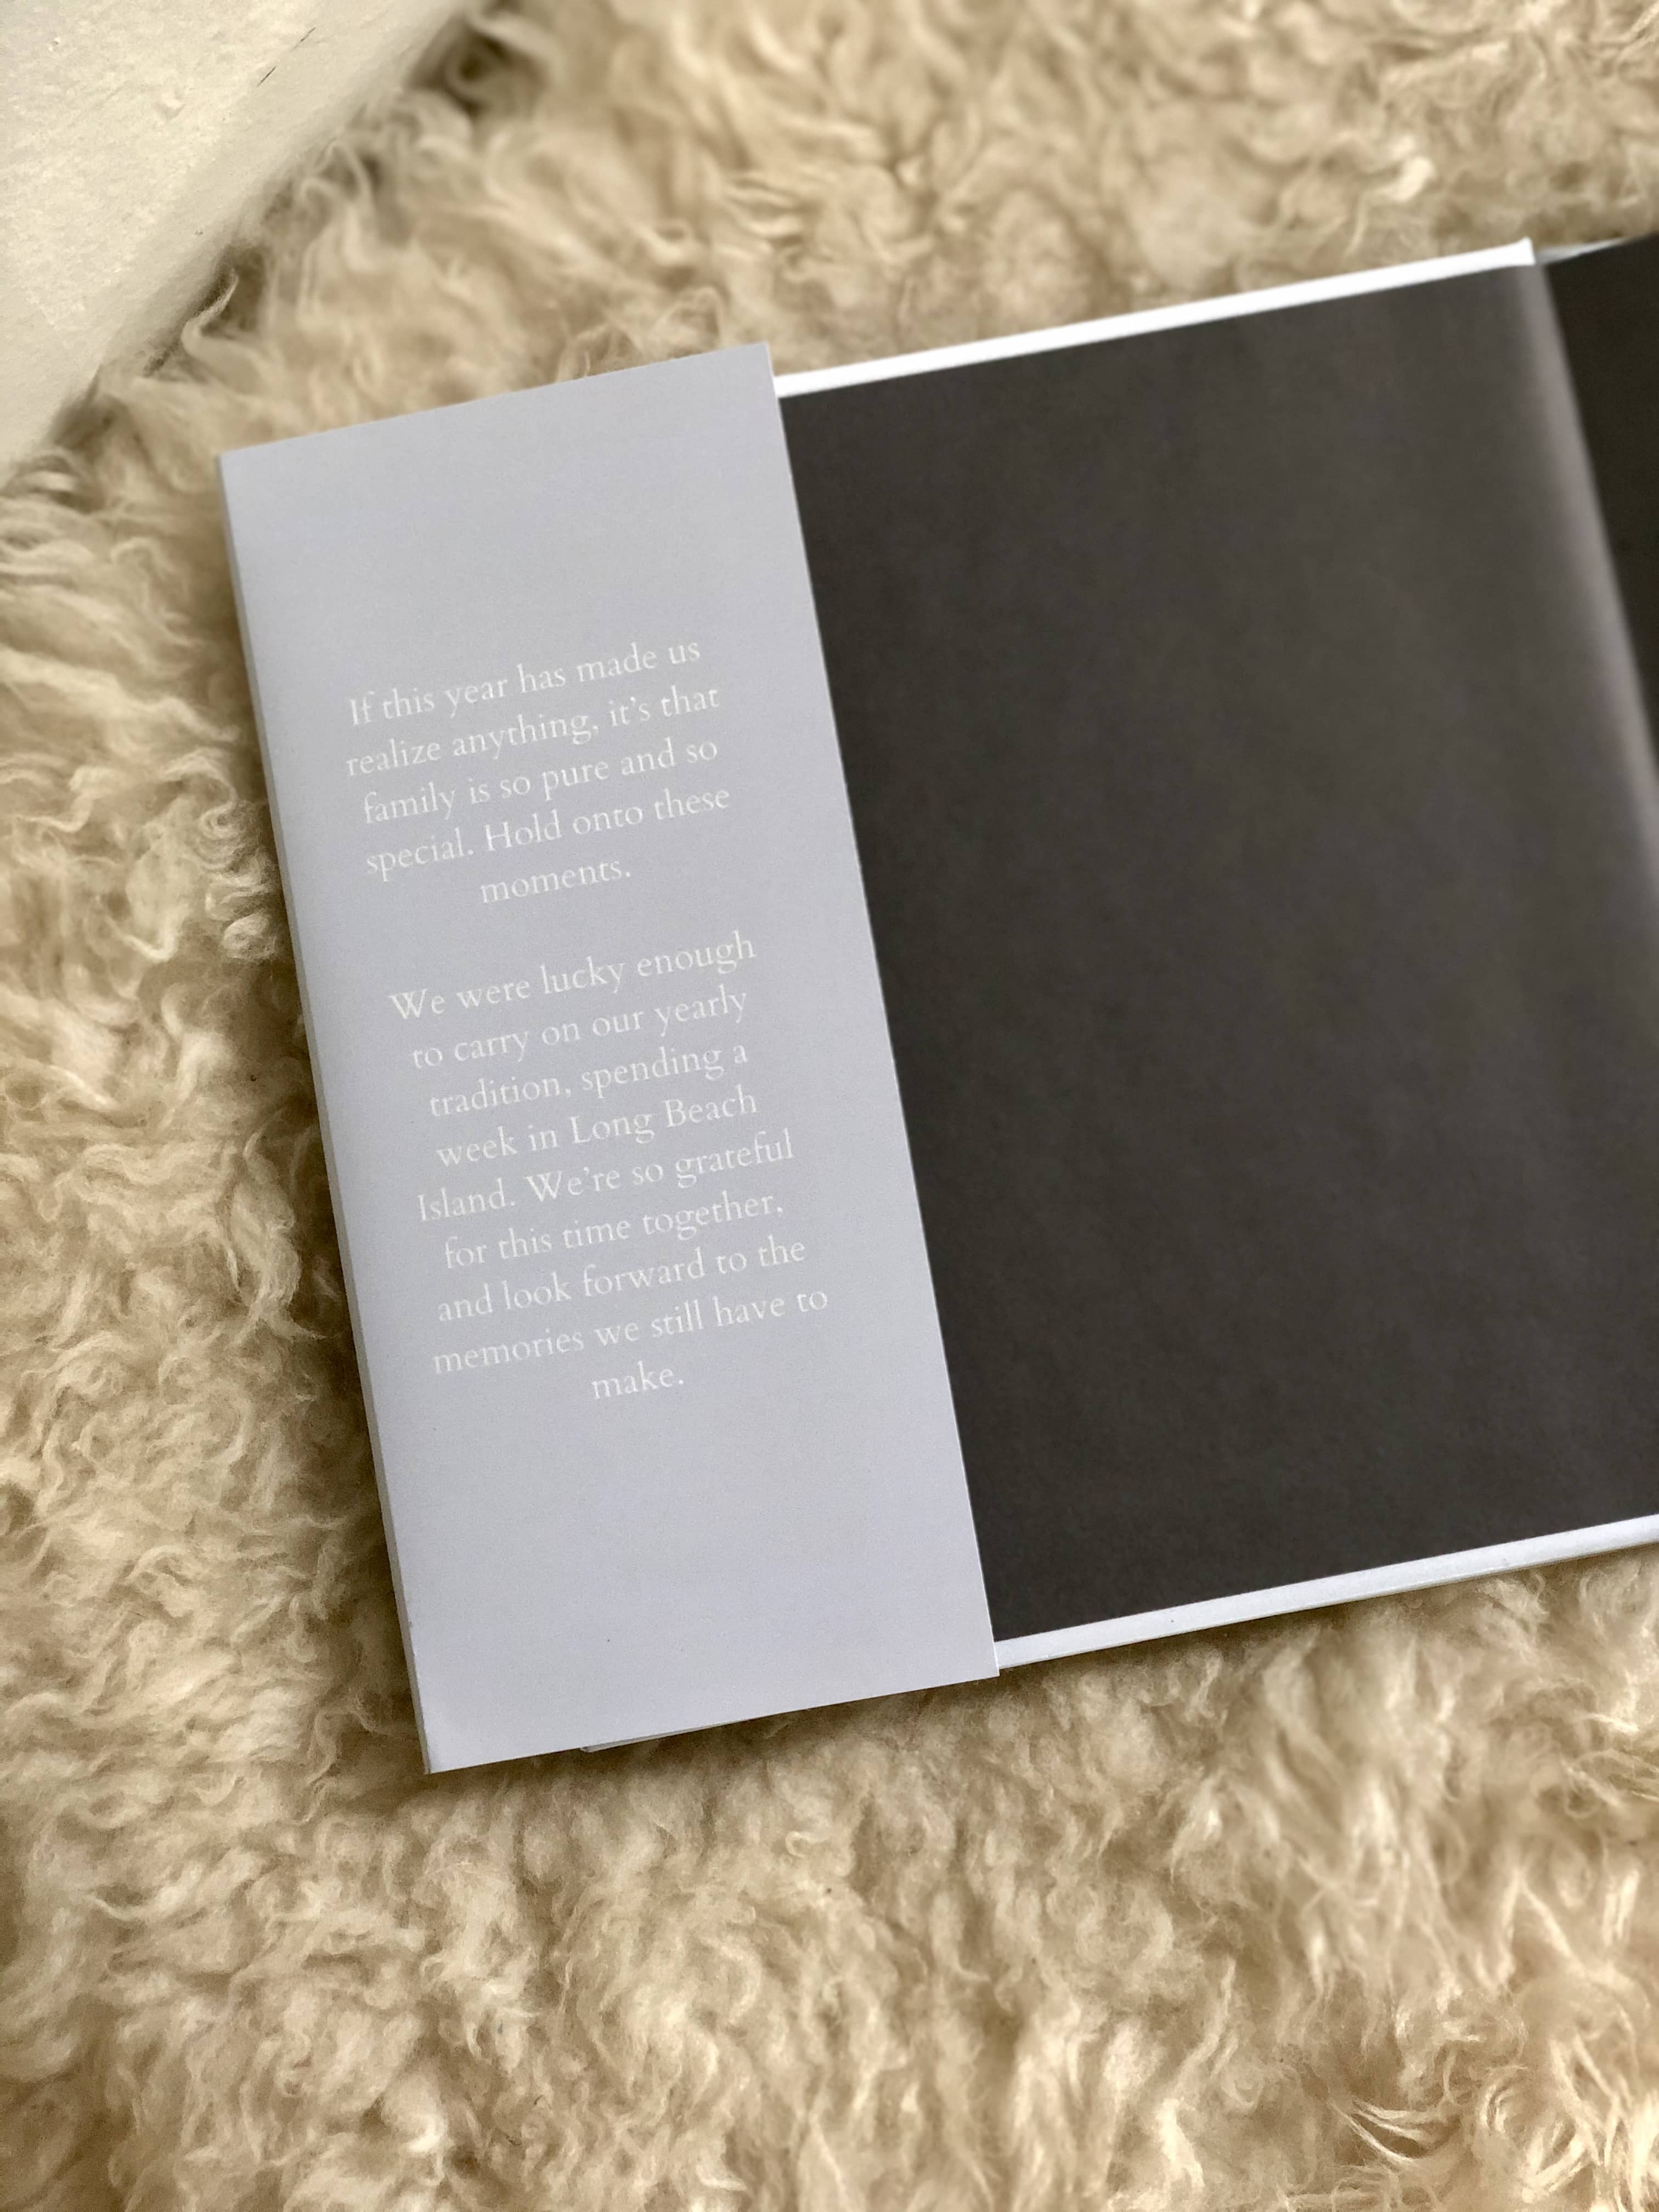 Add a custom dedication to your photo book's jacket